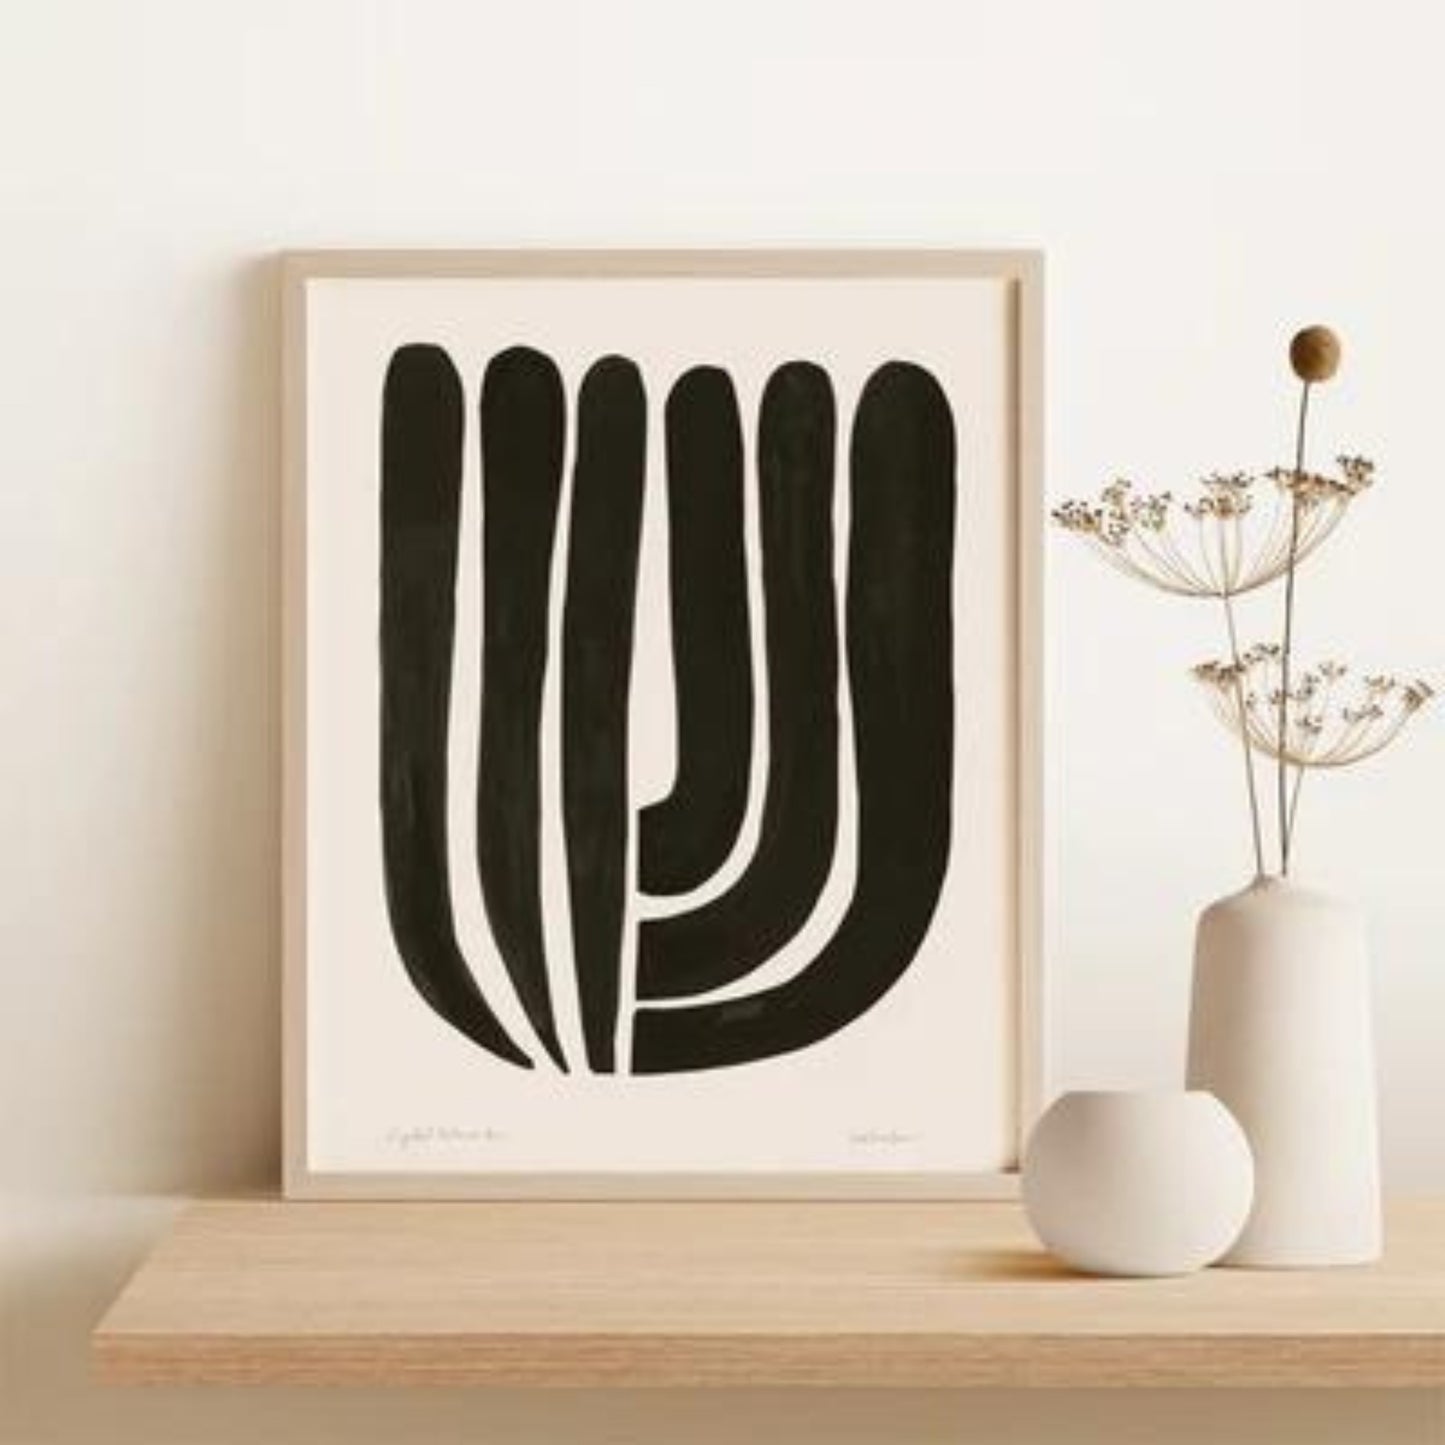 Framed back and white tulip shaped abstract print. leaning on shelf.